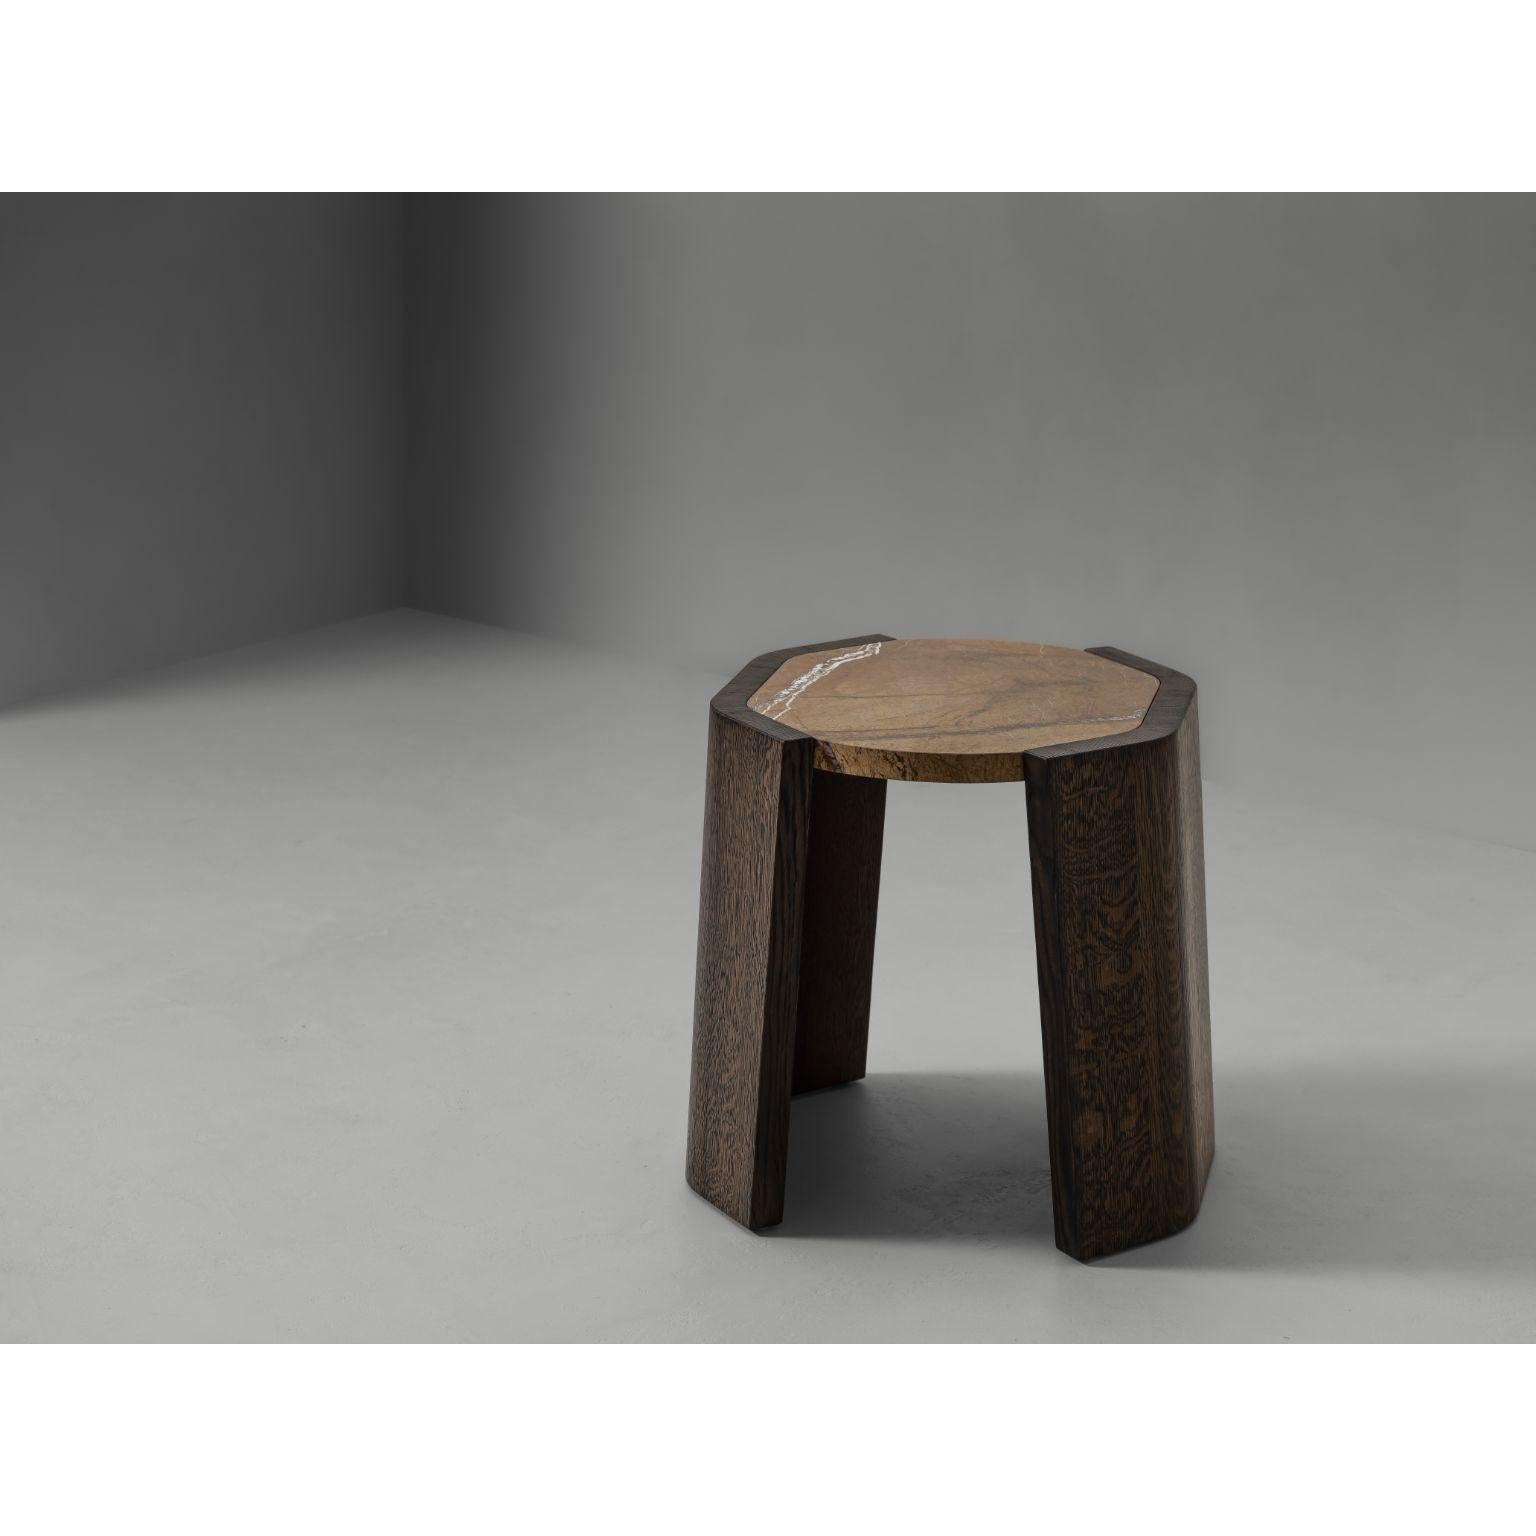 Jak Side Table by Van Rossum
Dimensions: D 55 x W 55 x H 40 cm
Materials: Wood

An alluring side table featuring a rounded octagonal tabletop that is suspended between two crescentshaped legs. Available with French oak legs and a French oak,